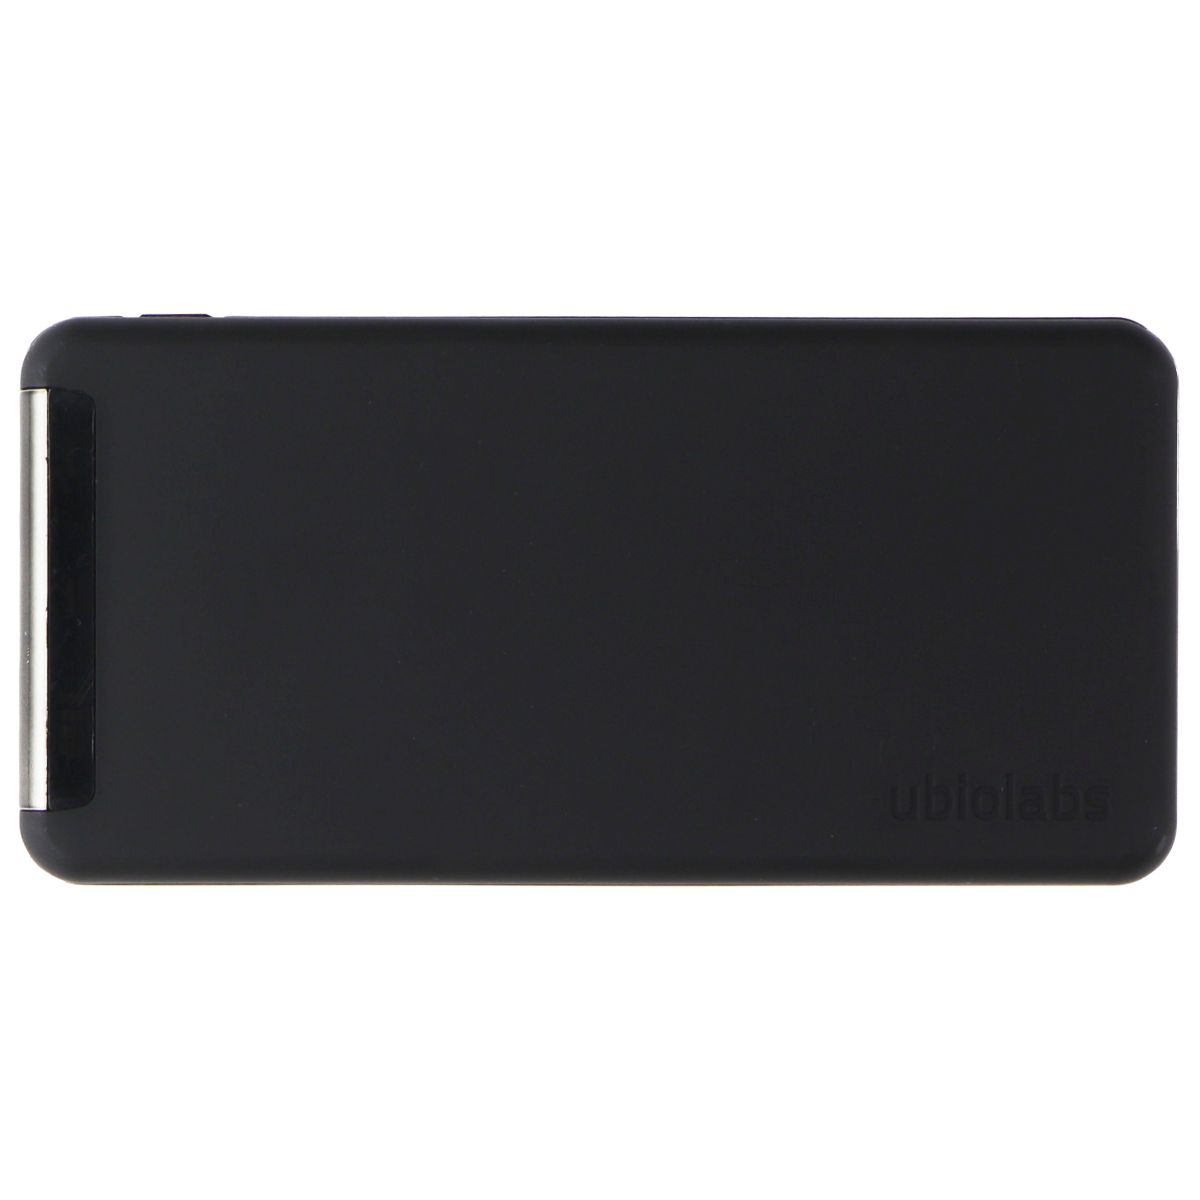 Ubiolabs 10,000mAh USB and USB-C Portable Power Bank - Black Cell Phone - Chargers & Cradles ubiolabs    - Simple Cell Bulk Wholesale Pricing - USA Seller